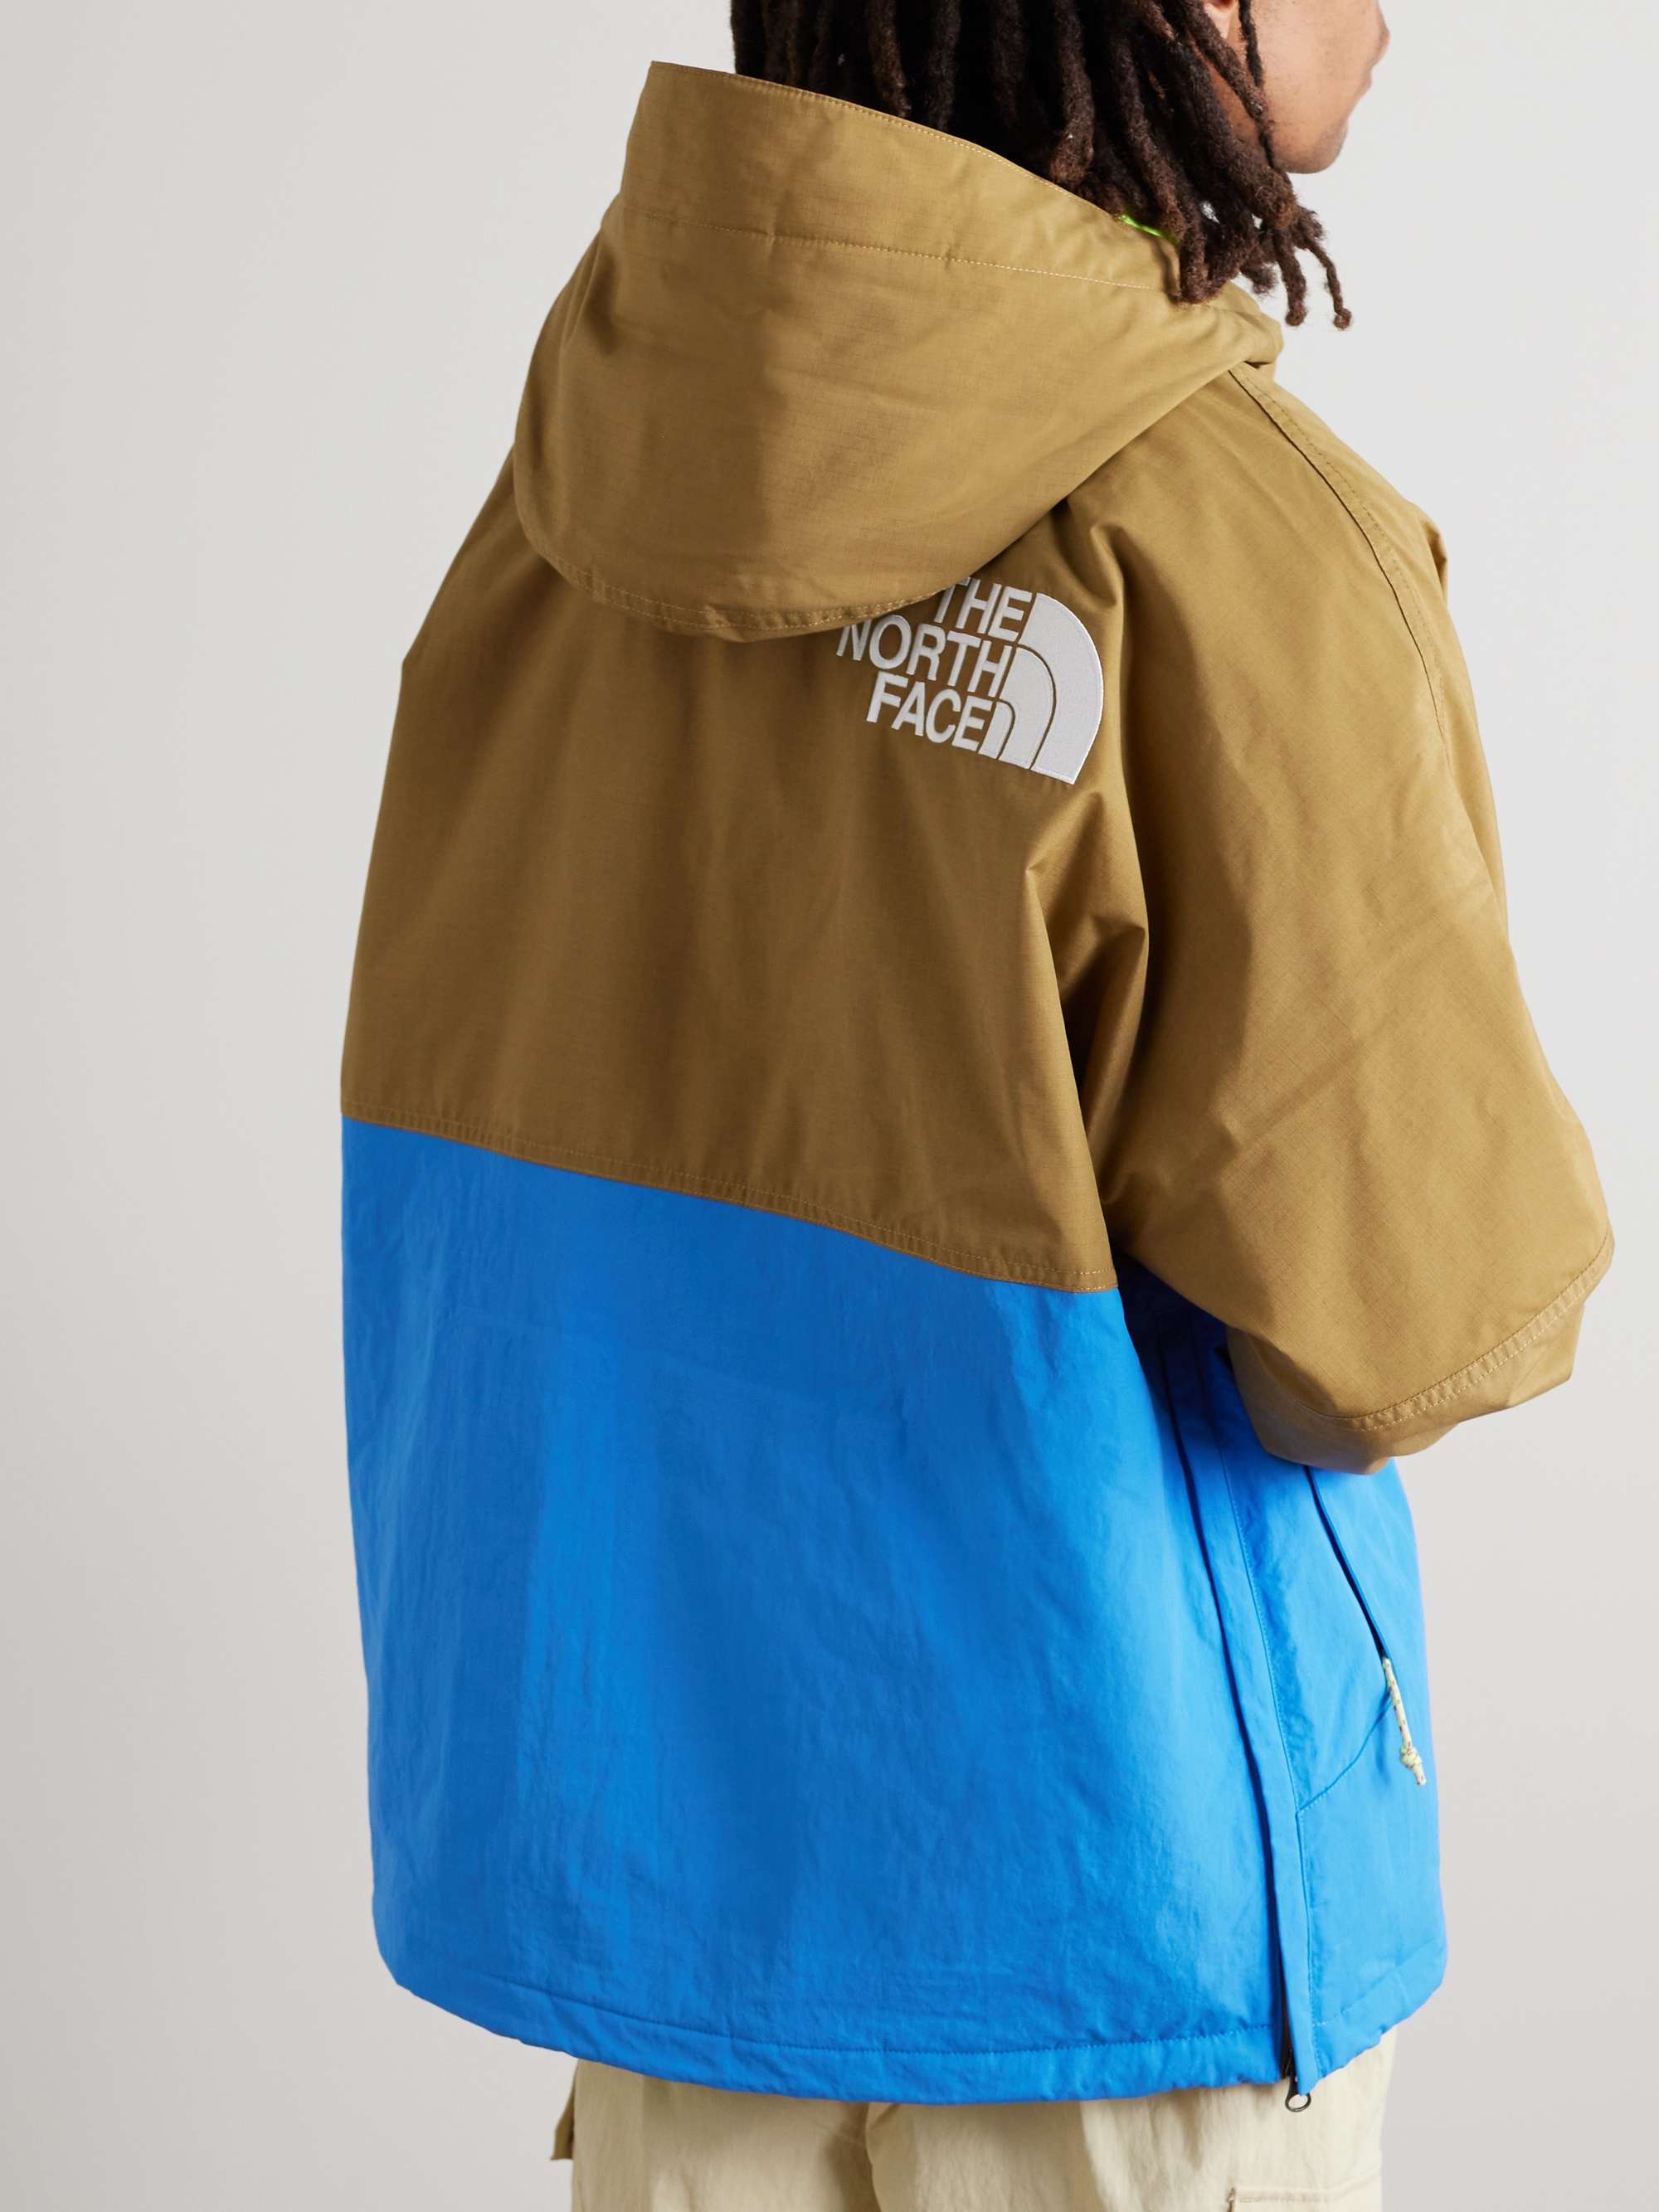 THE NORTH FACE 78 Low-Fi Hi-Tek Windjammer Embroidered Ripstop and Shell Hooded Jacket